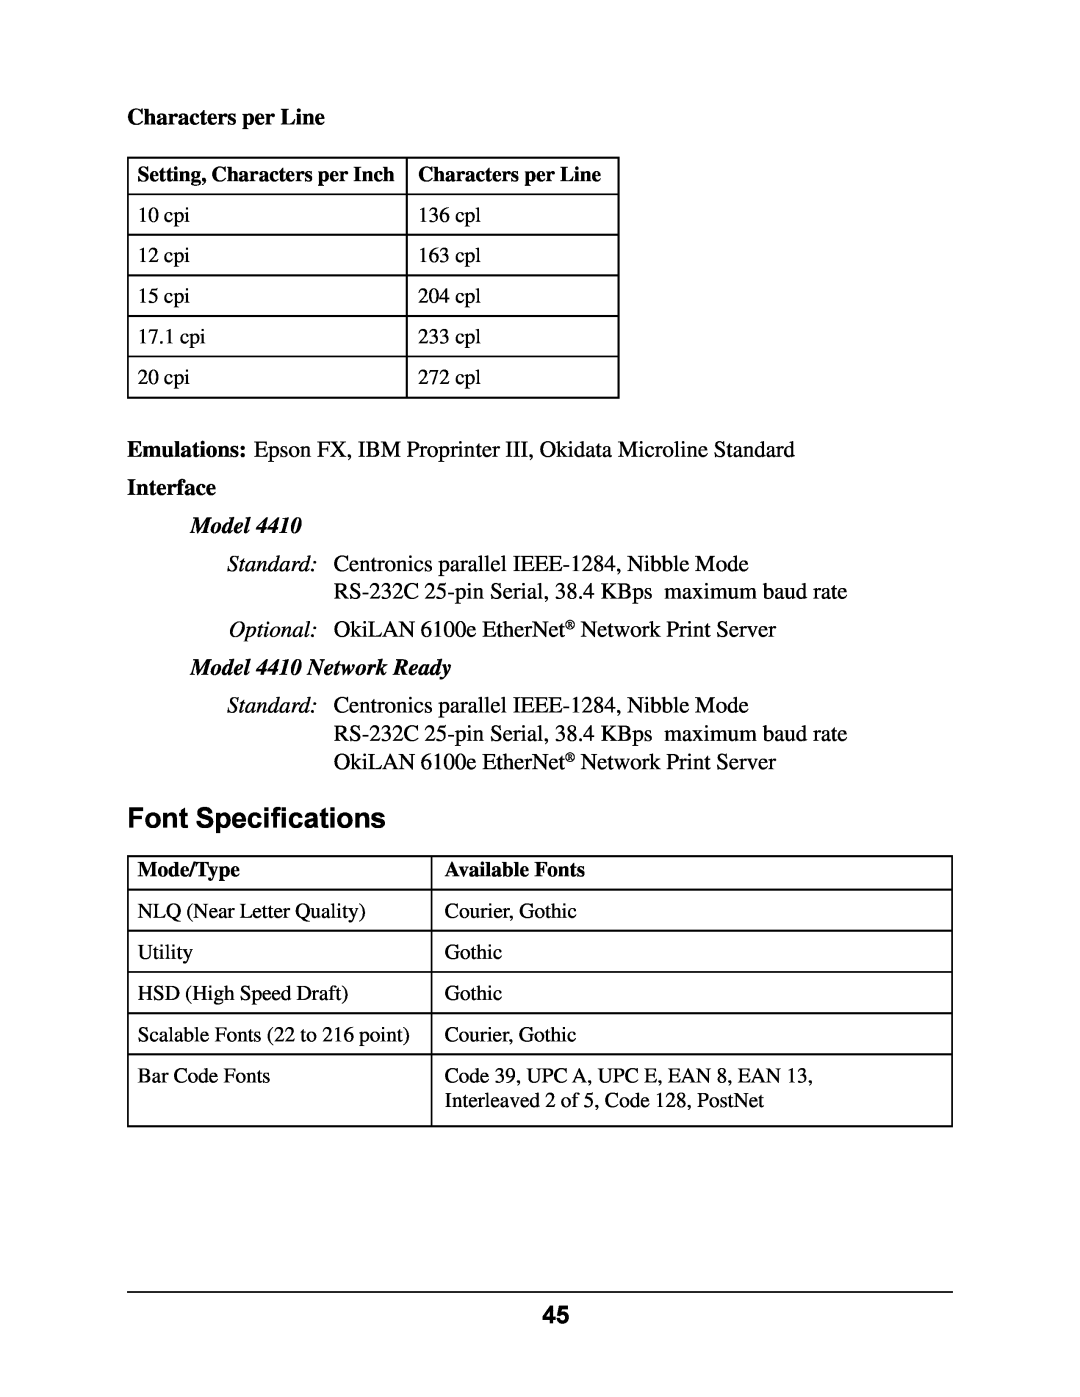 Oki manual Font Specifications, Characters per Line, Interface, Model 4410 Network Ready 